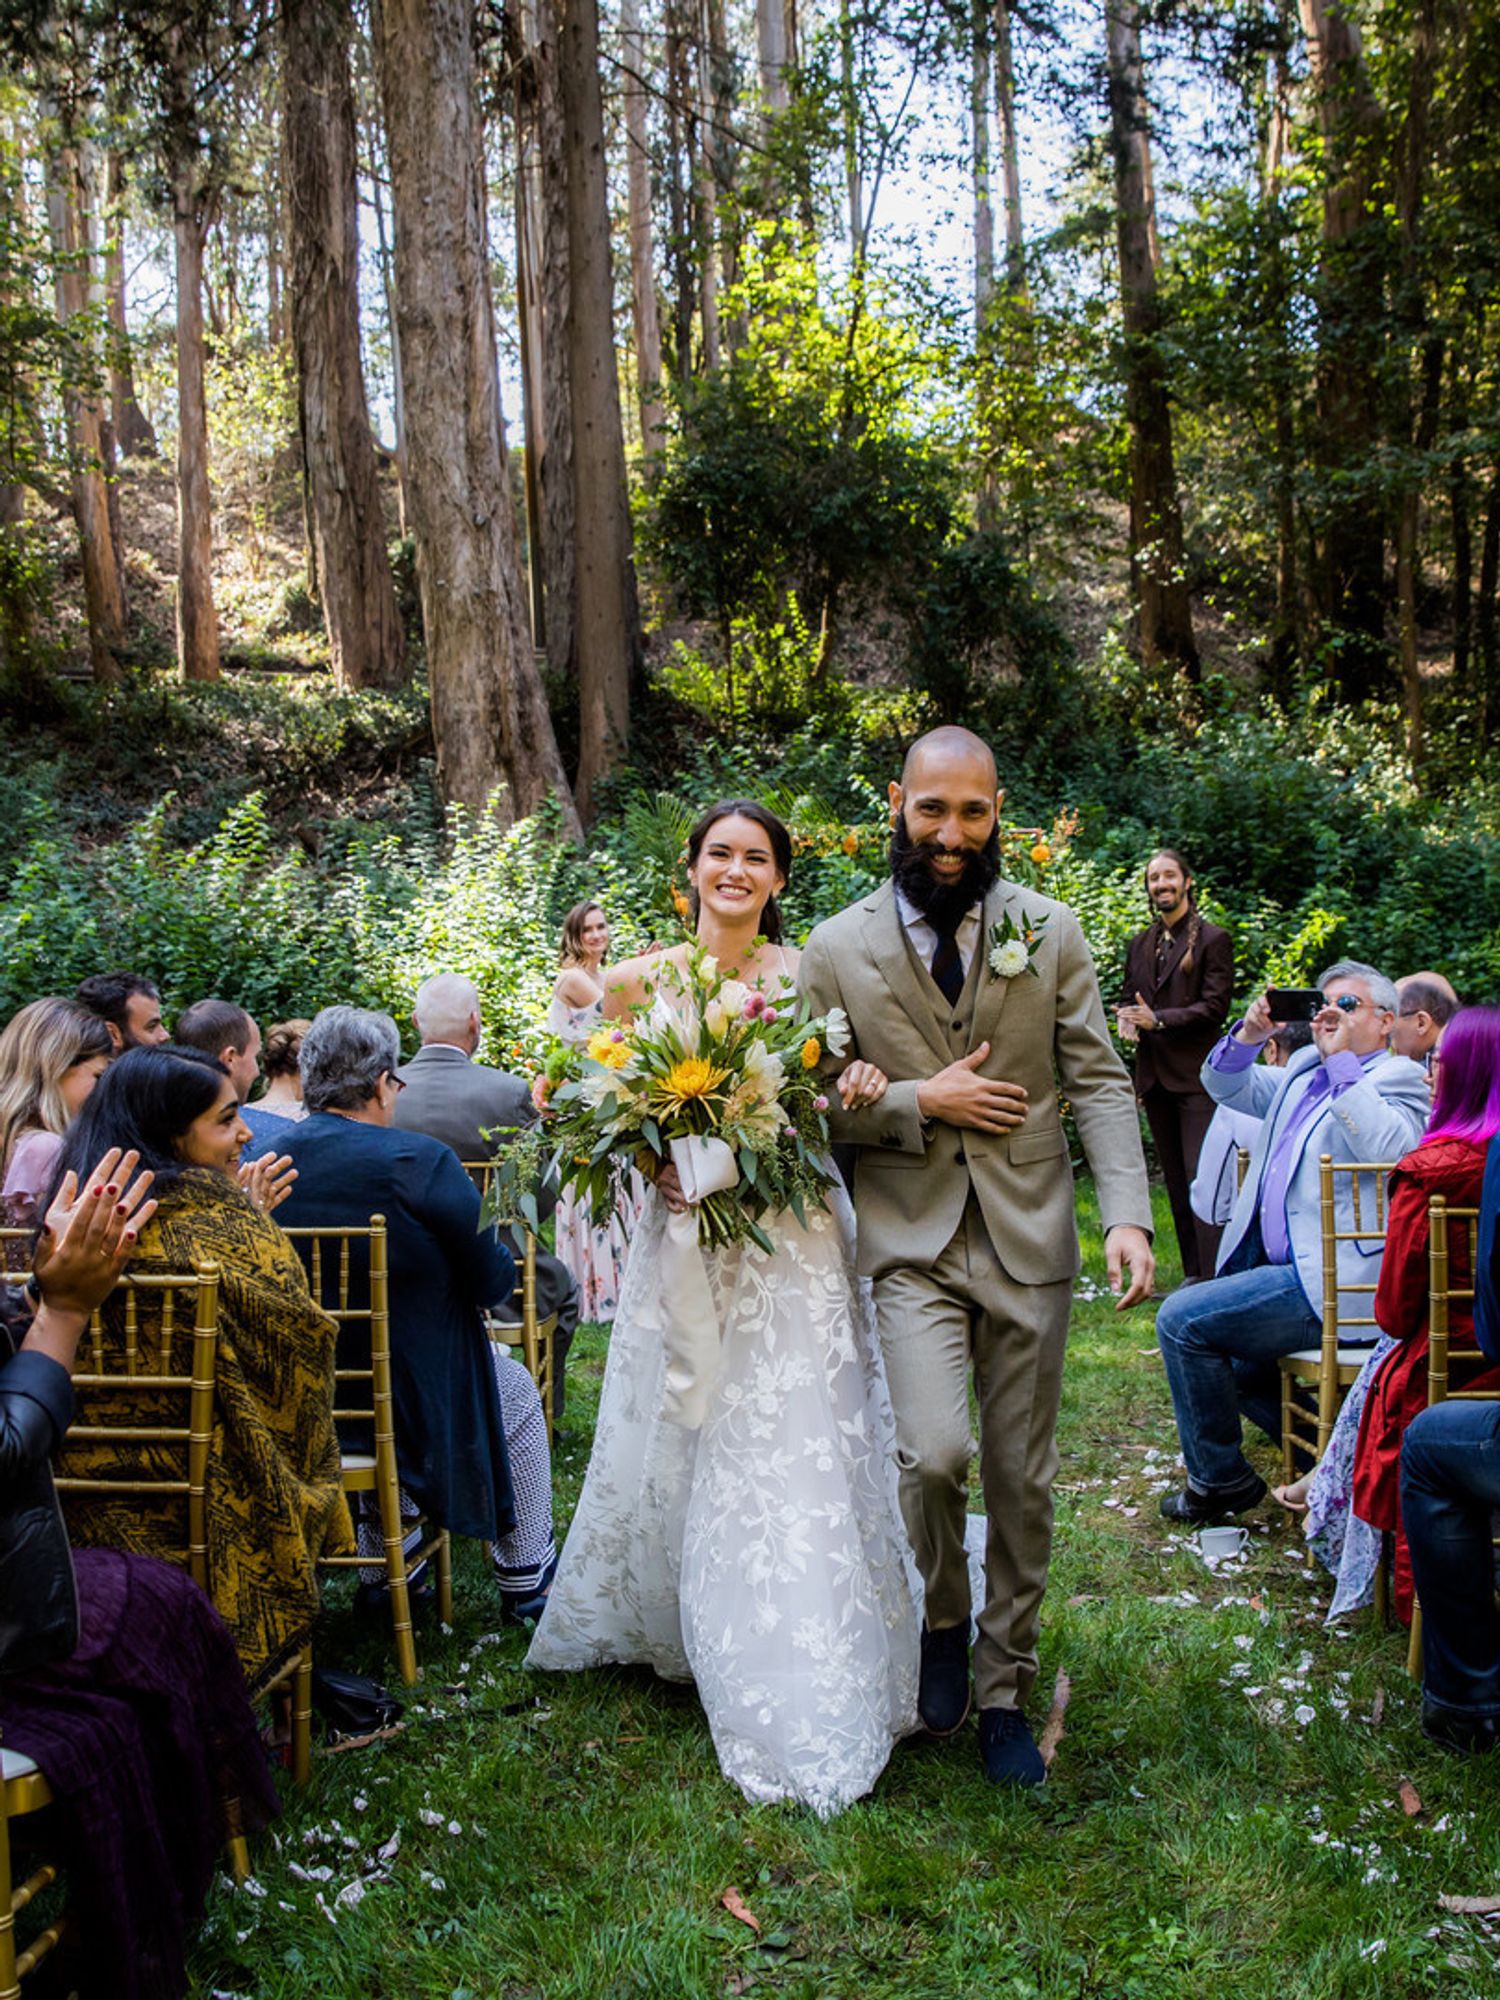 Wedding Inspiration: A Forest Fairytale at San Francisco's Stern Grove - 7x7  Bay Area